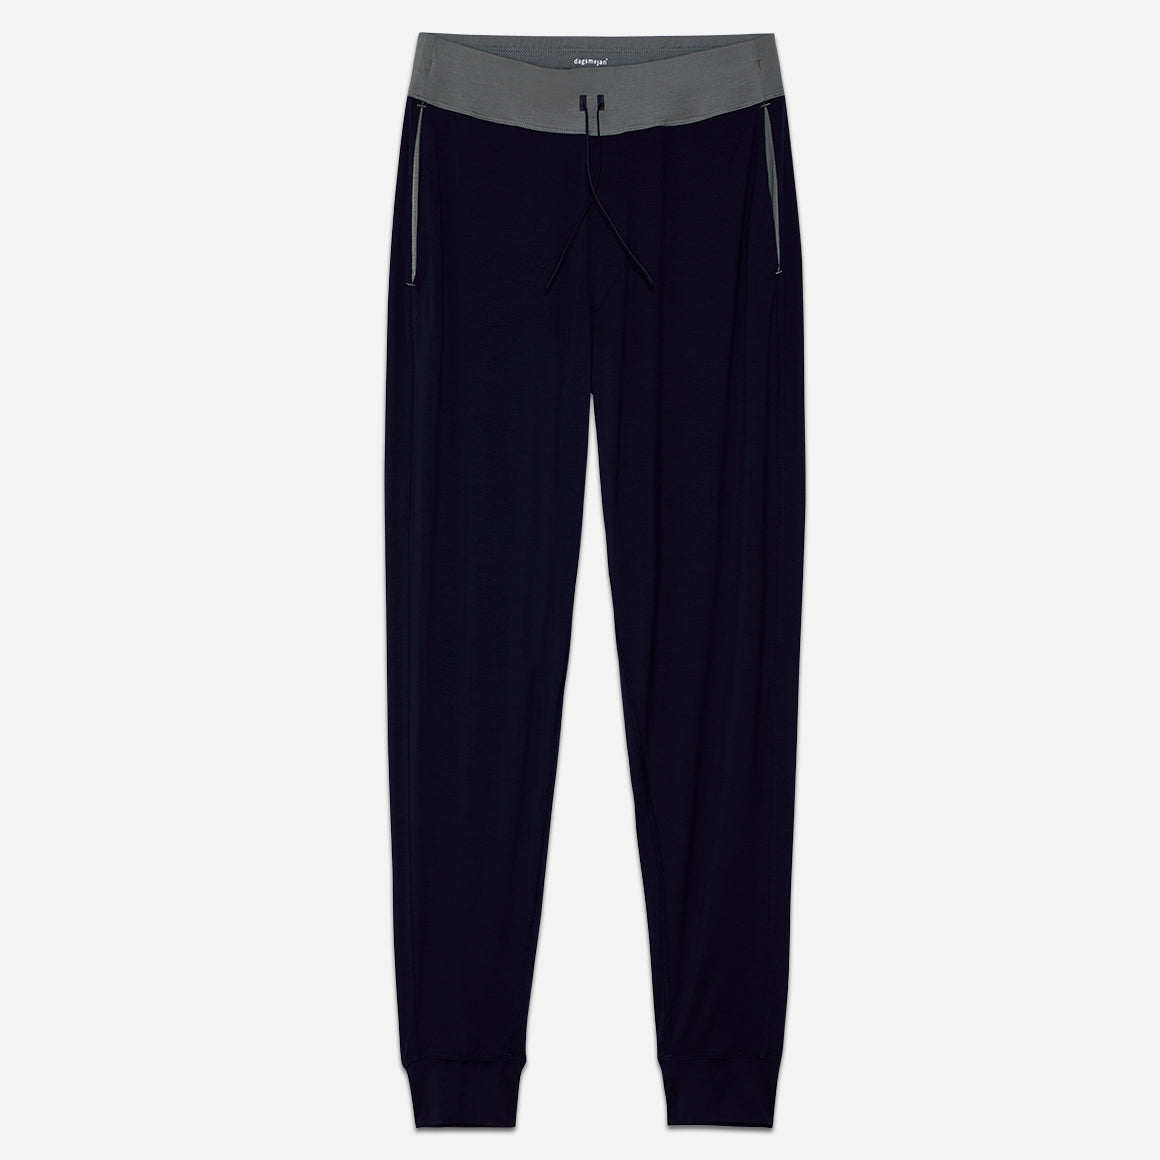 I Can't Sleep in Pants, but These Lightweight Joggers Keep Me Cool All Night